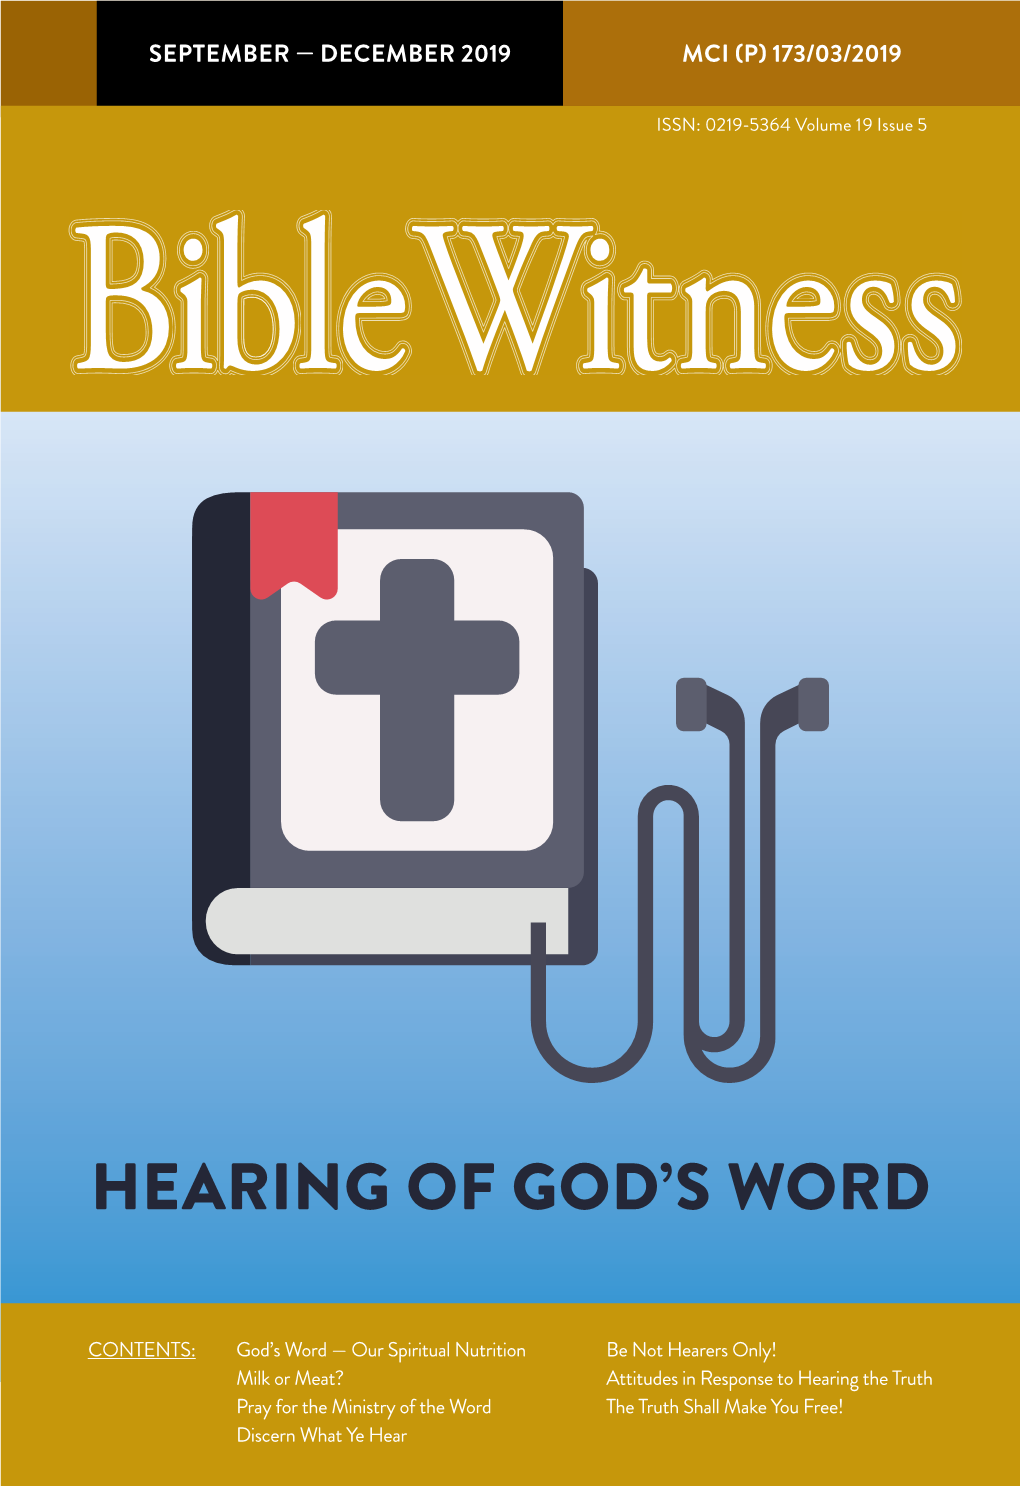 Hearing of God's Word